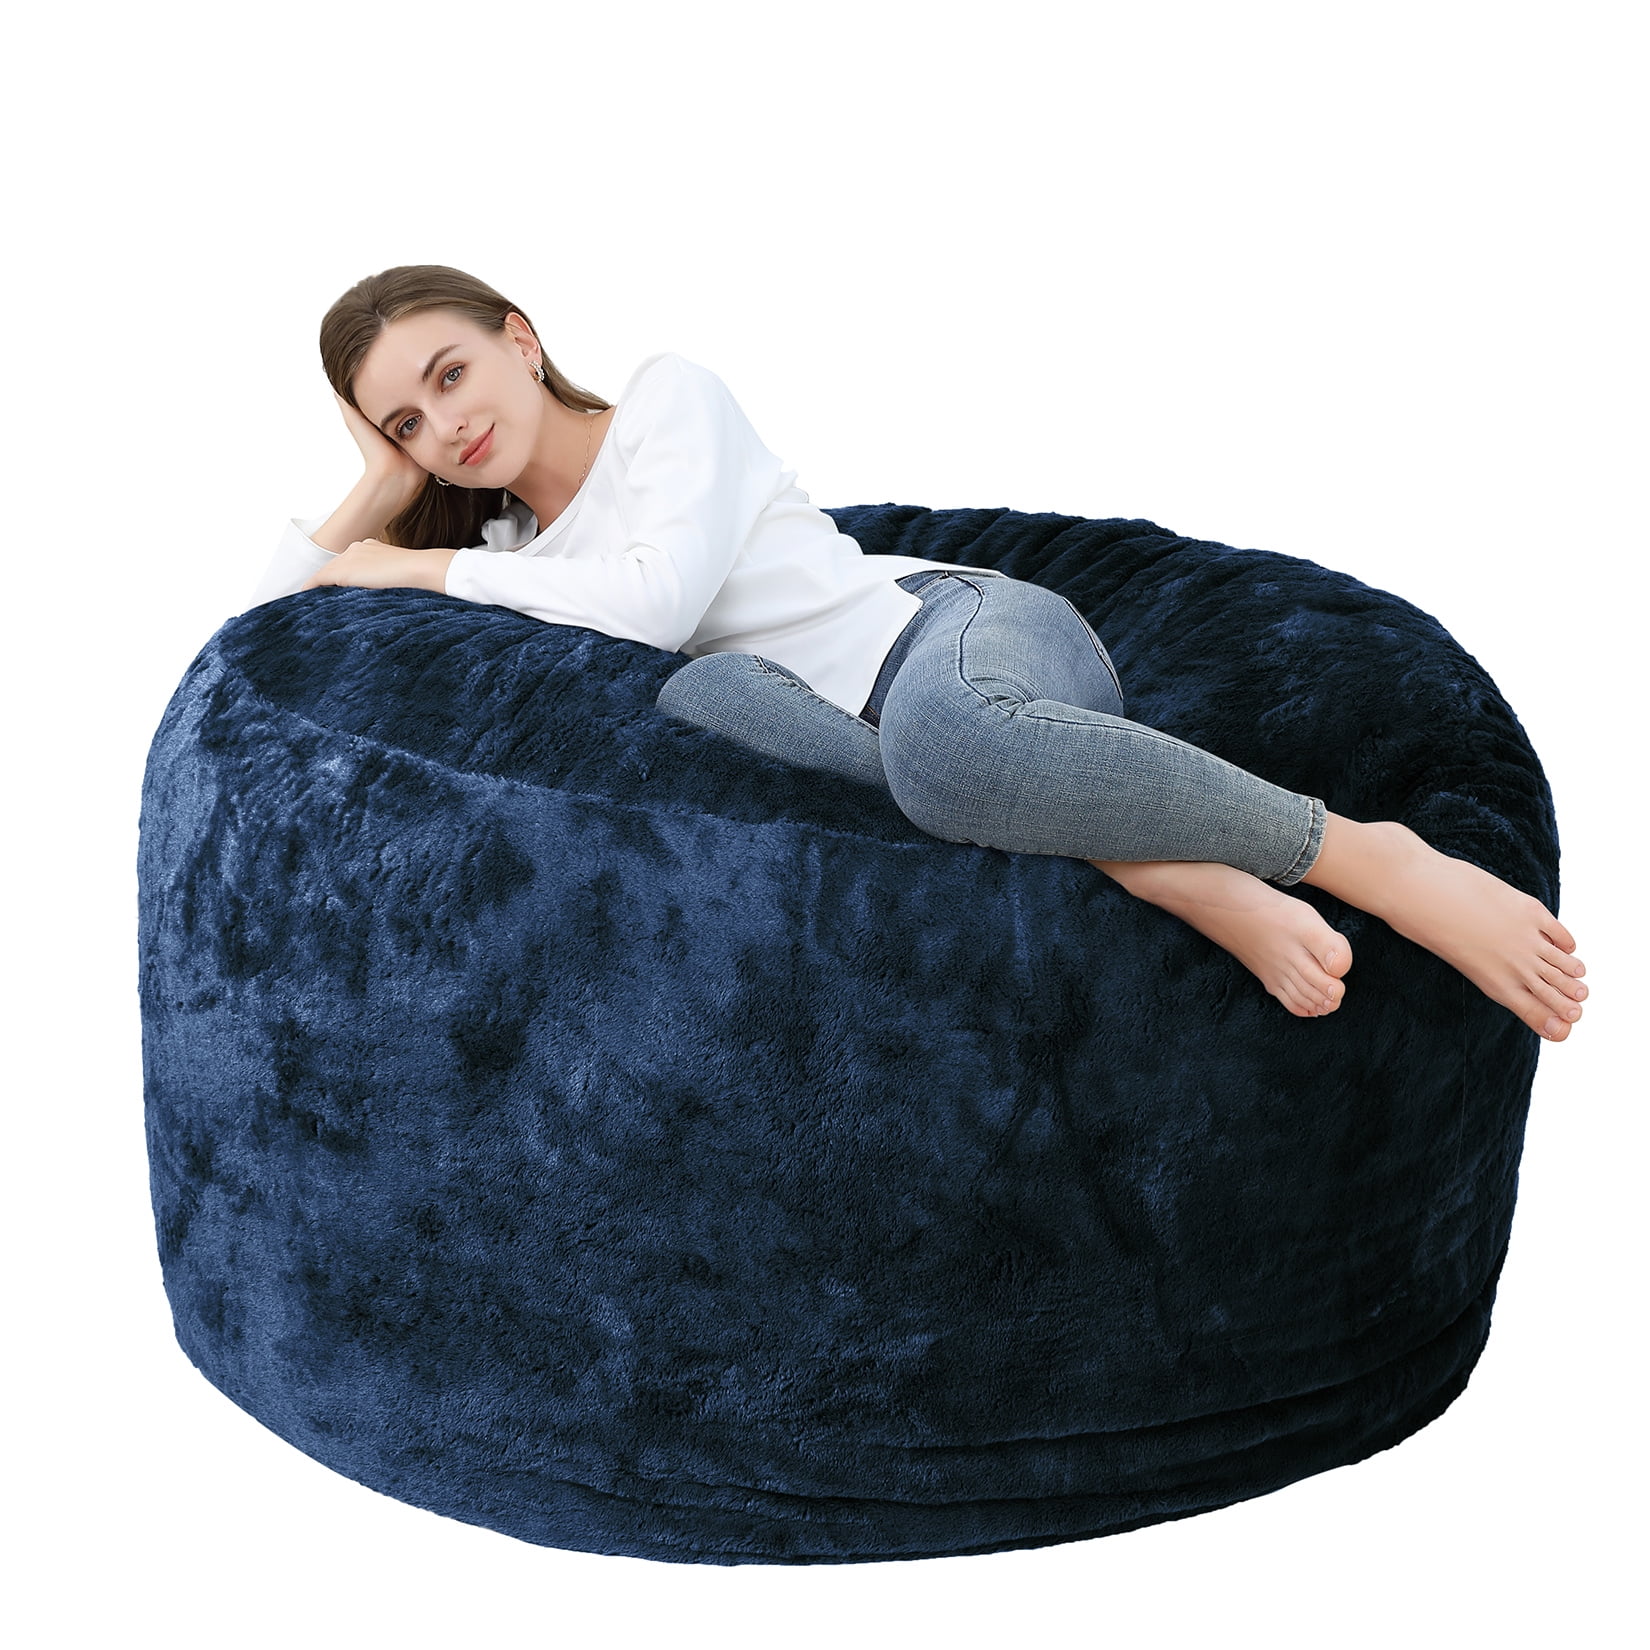 EDUJIN 3 ft Bean Bag Chair: 3' Medium Memory Foam Bean Bag Chairs for  Adults/Teens with Filling,Ultra Soft Dutch Velvet Cover, Round Fluffy Lazy  Sofa